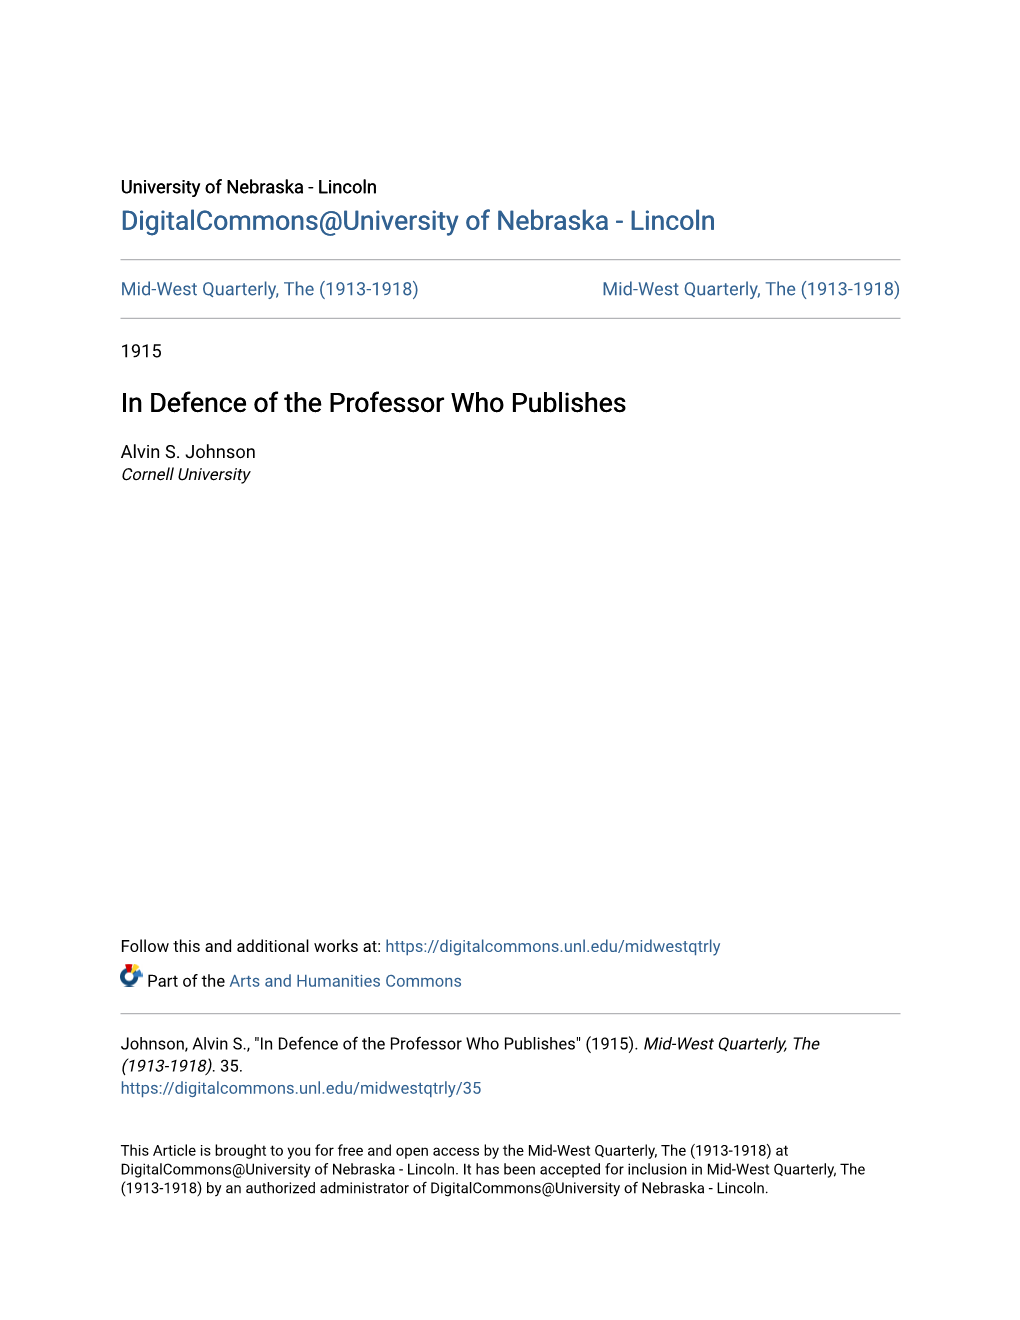 In Defence of the Professor Who Publishes